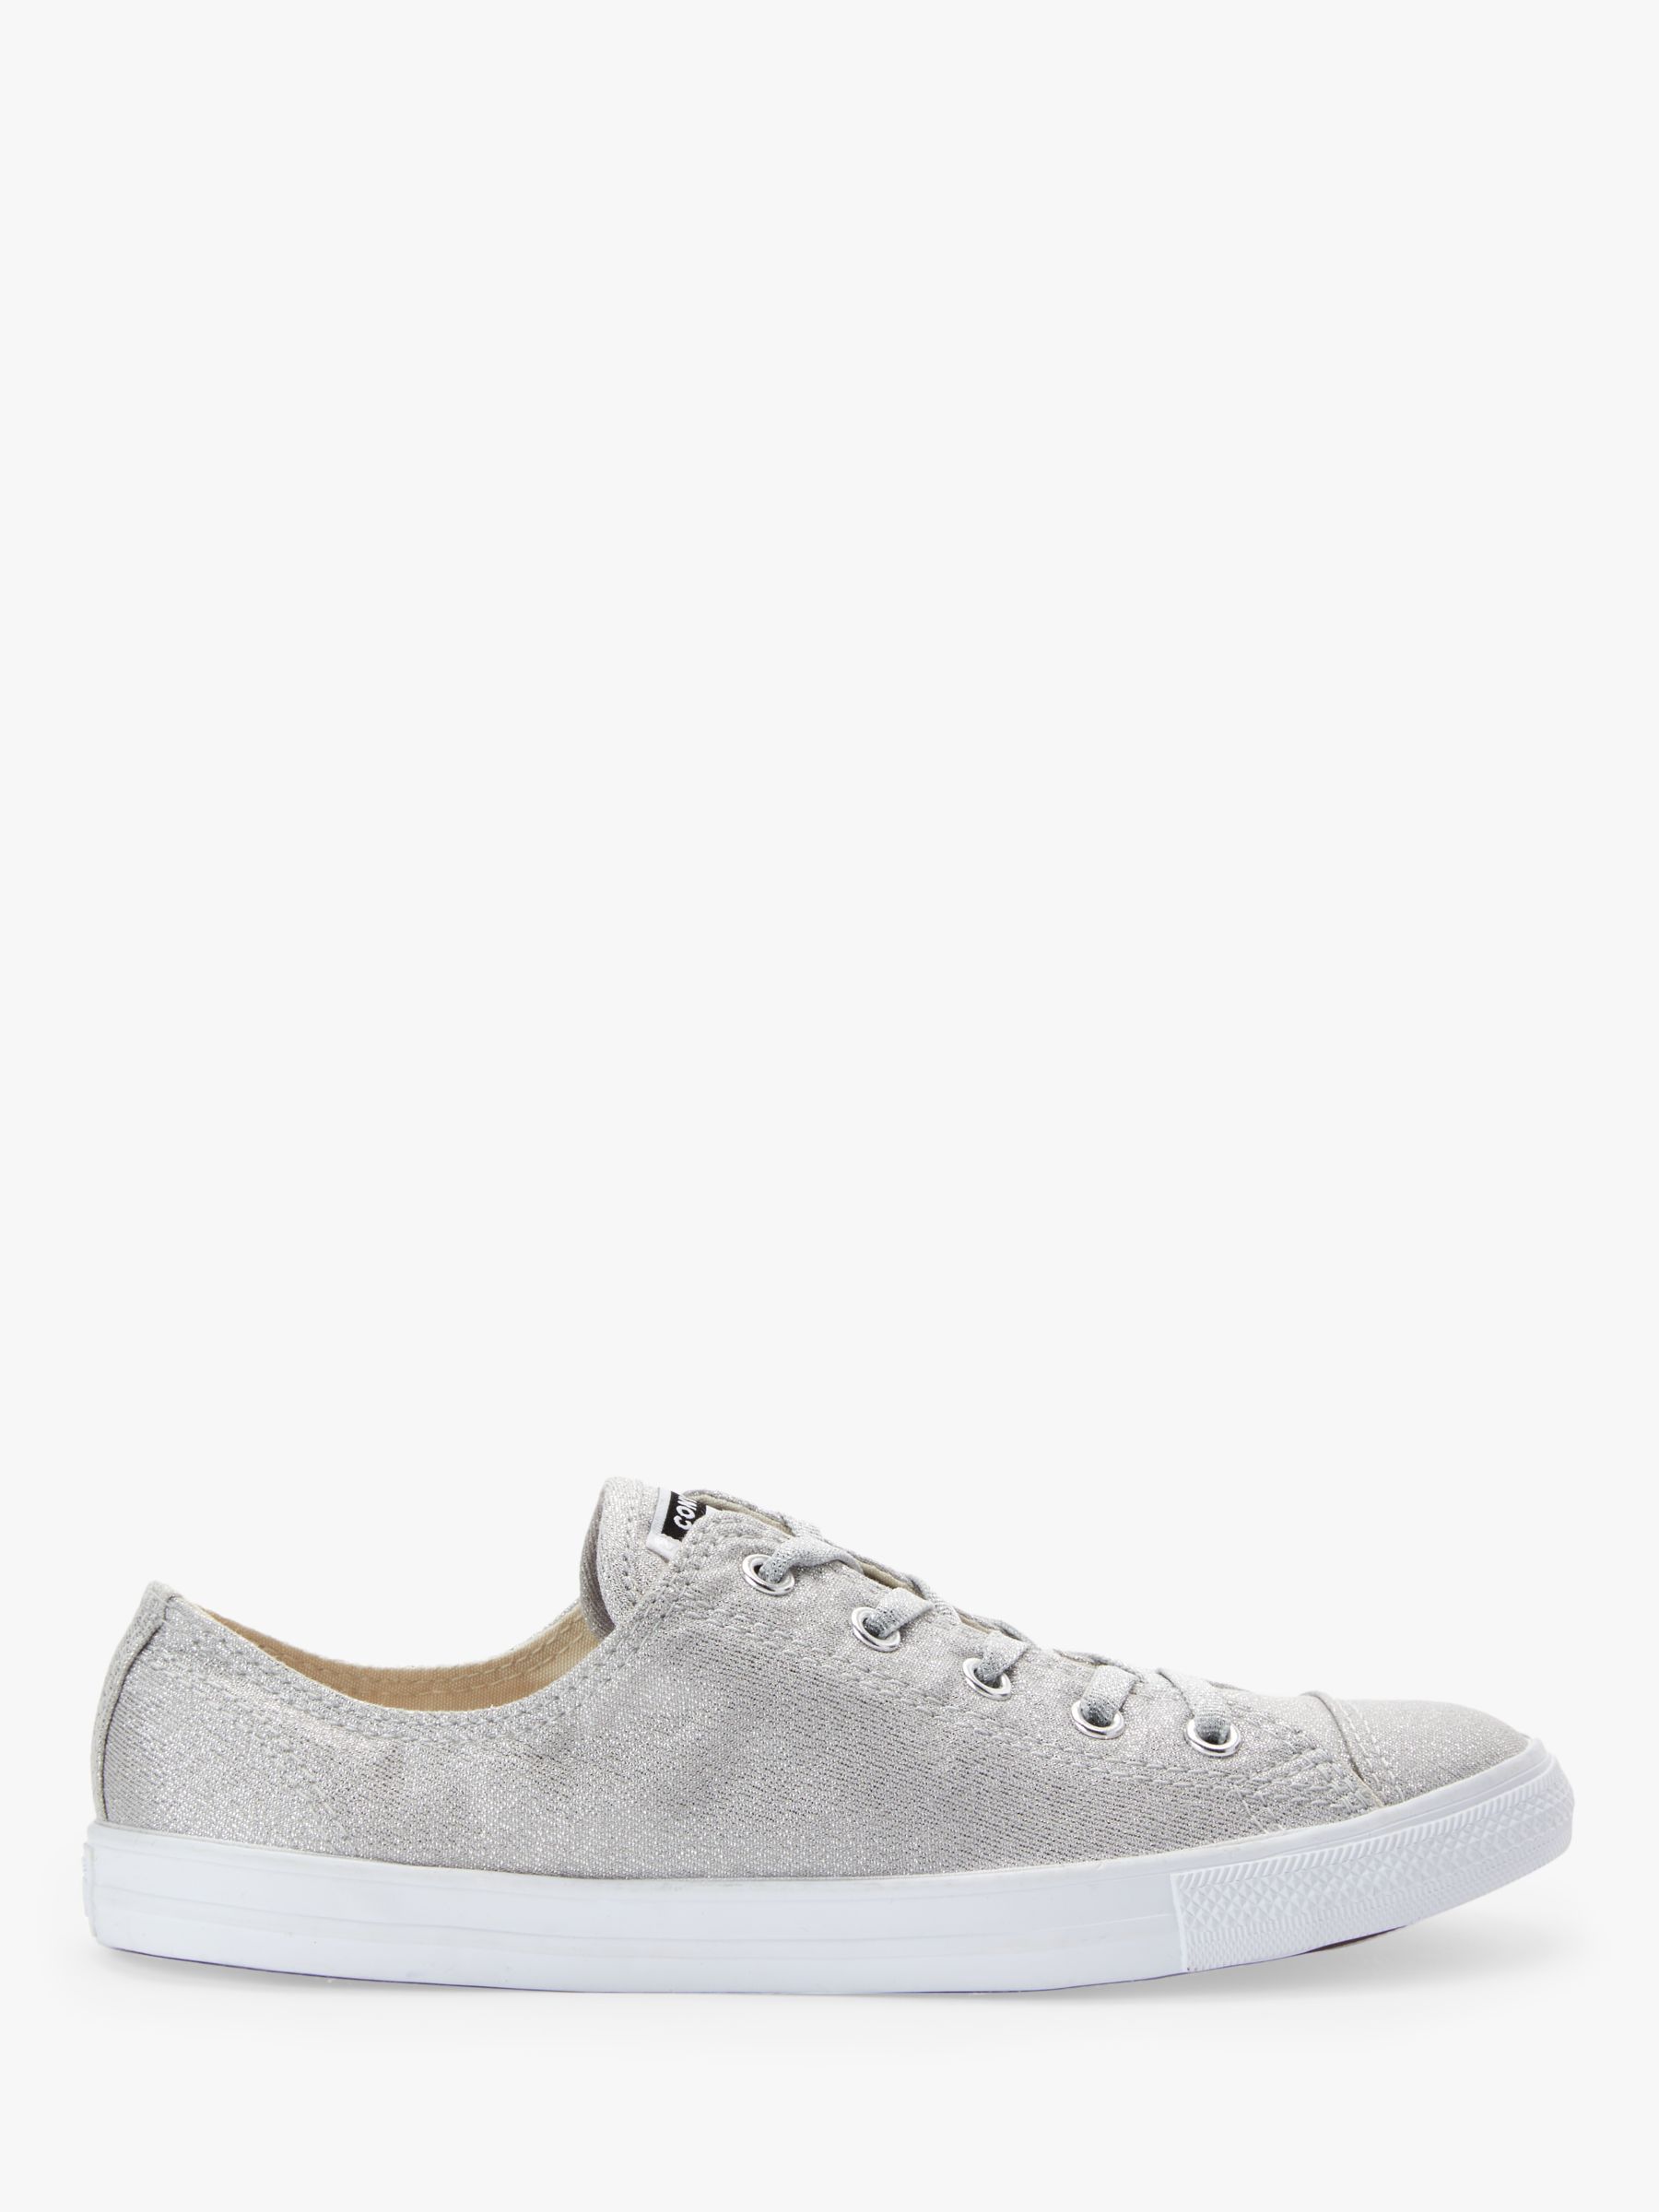 Converse Chuck Taylor All Star Dainty Canvas Trainers, Glitter at John  Lewis \u0026 Partners